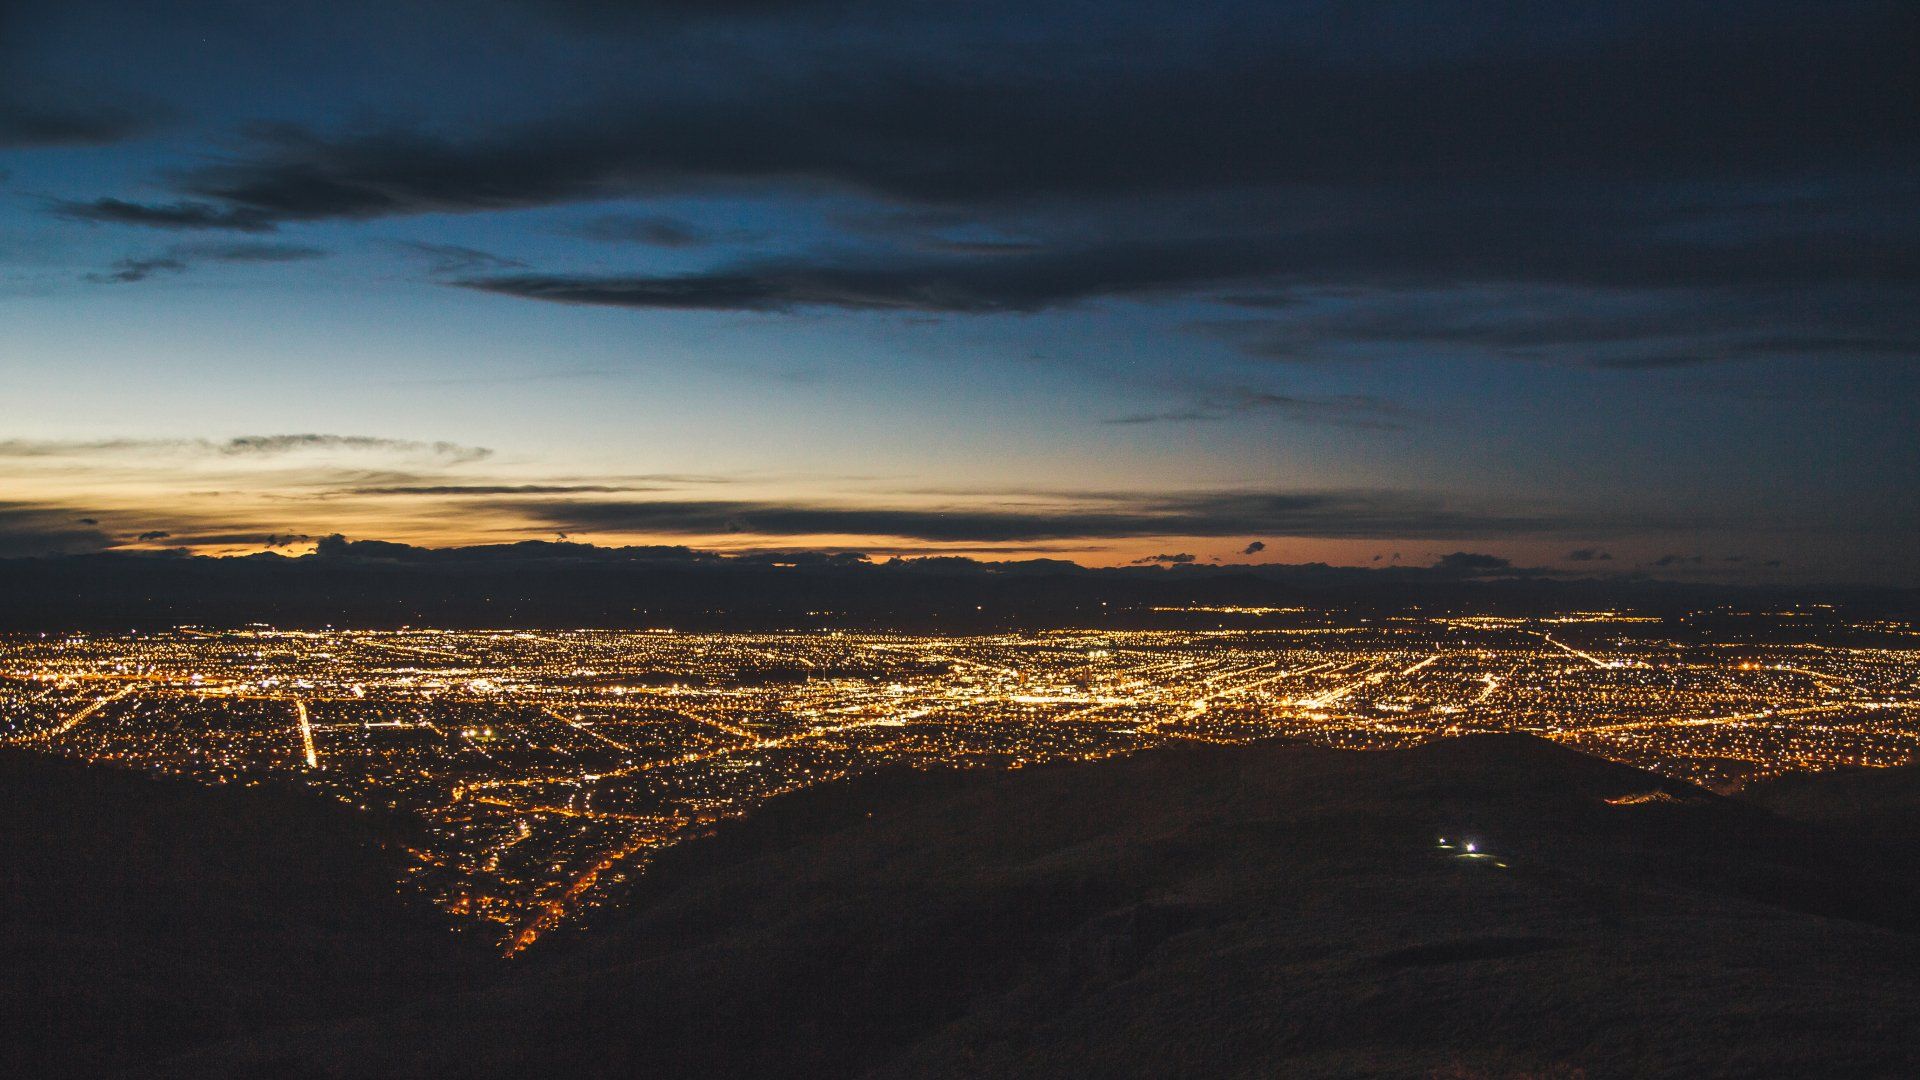 Image: Overlooking Christchurch at night